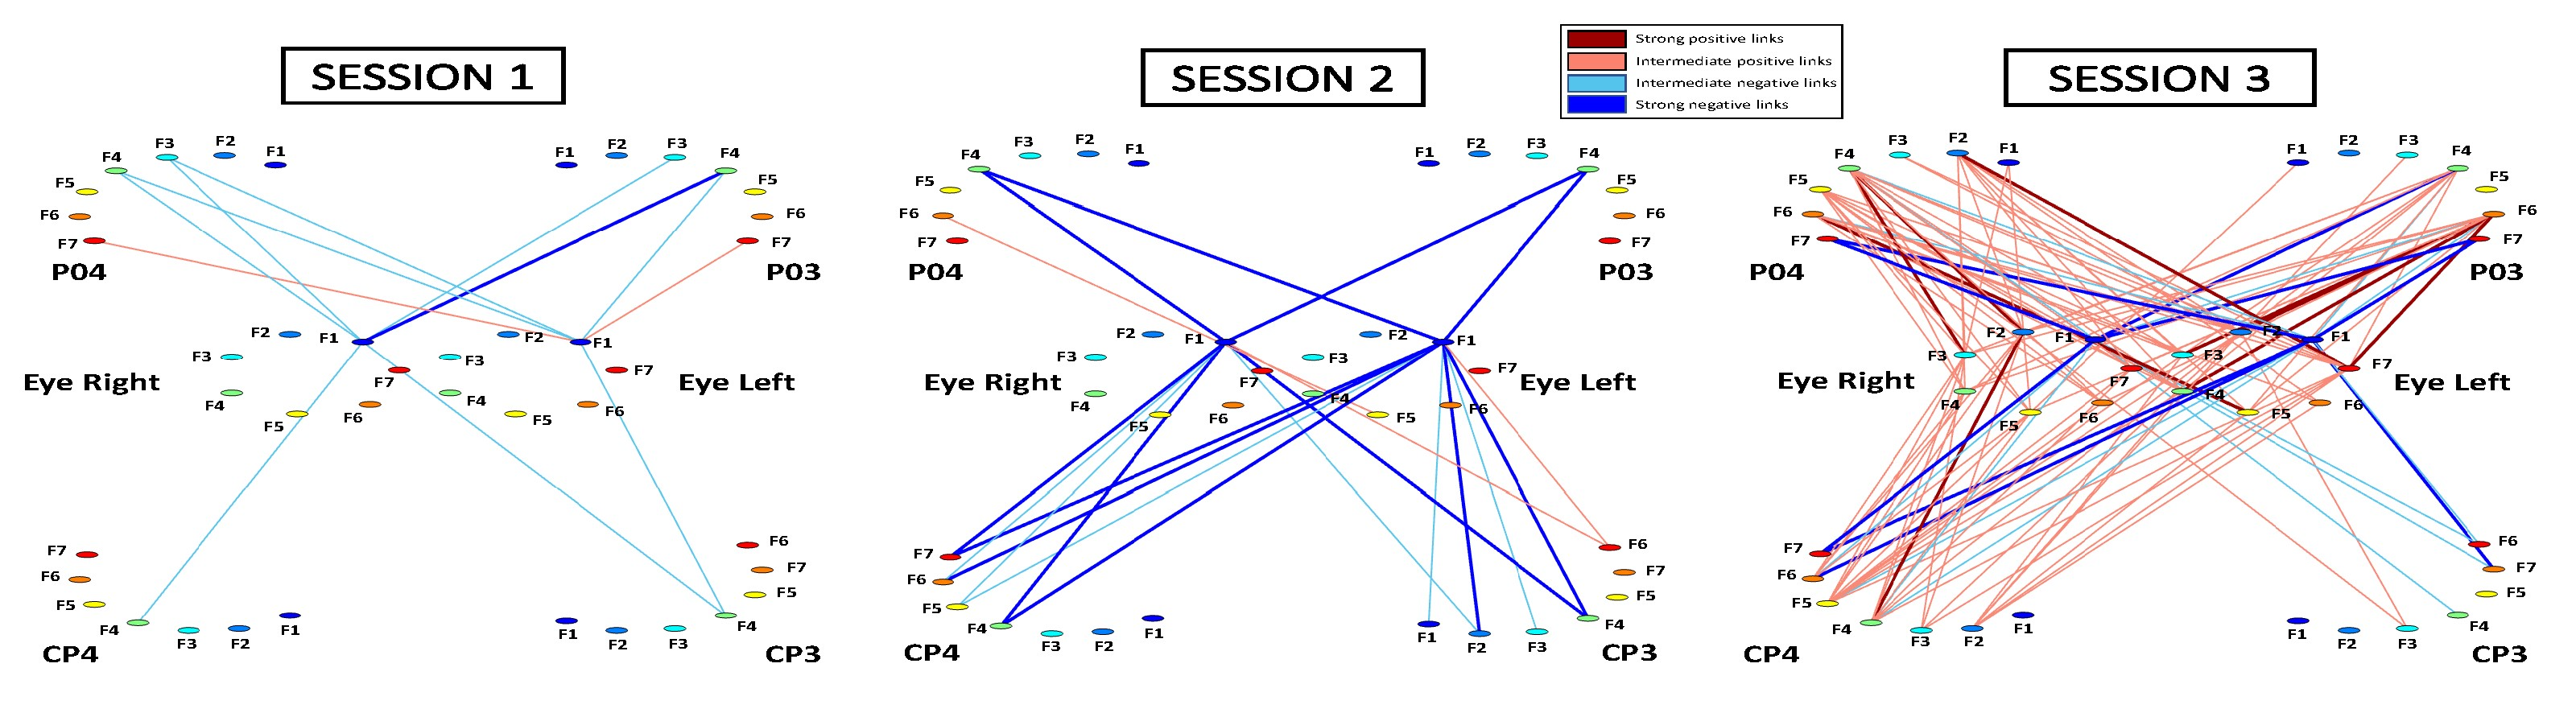 Case report: Cortico-ocular interaction networks in NBA2K